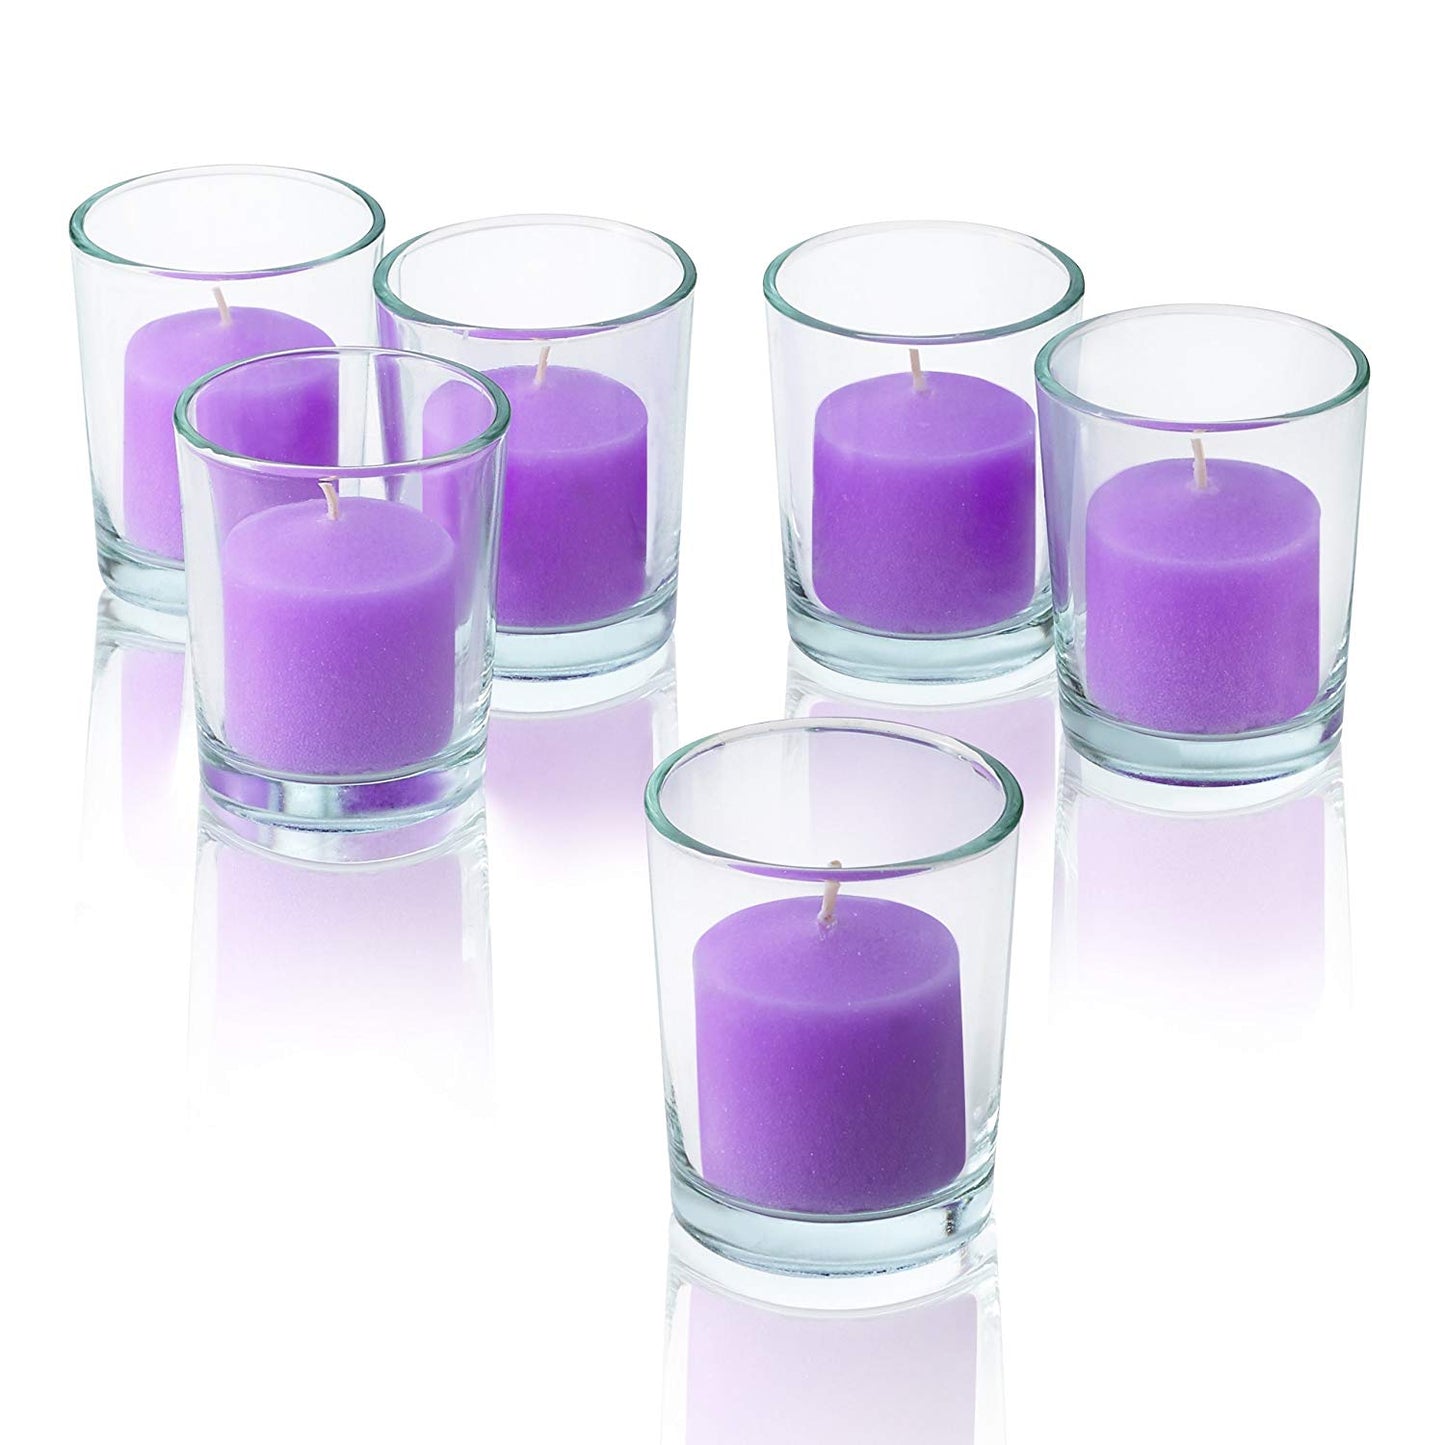 Wax Votive Candles 8 Hours Burning Unscented Ideal for Birthday Aromatherapy Party Candle Gardens & Home Décor (Set of 12,Purple)